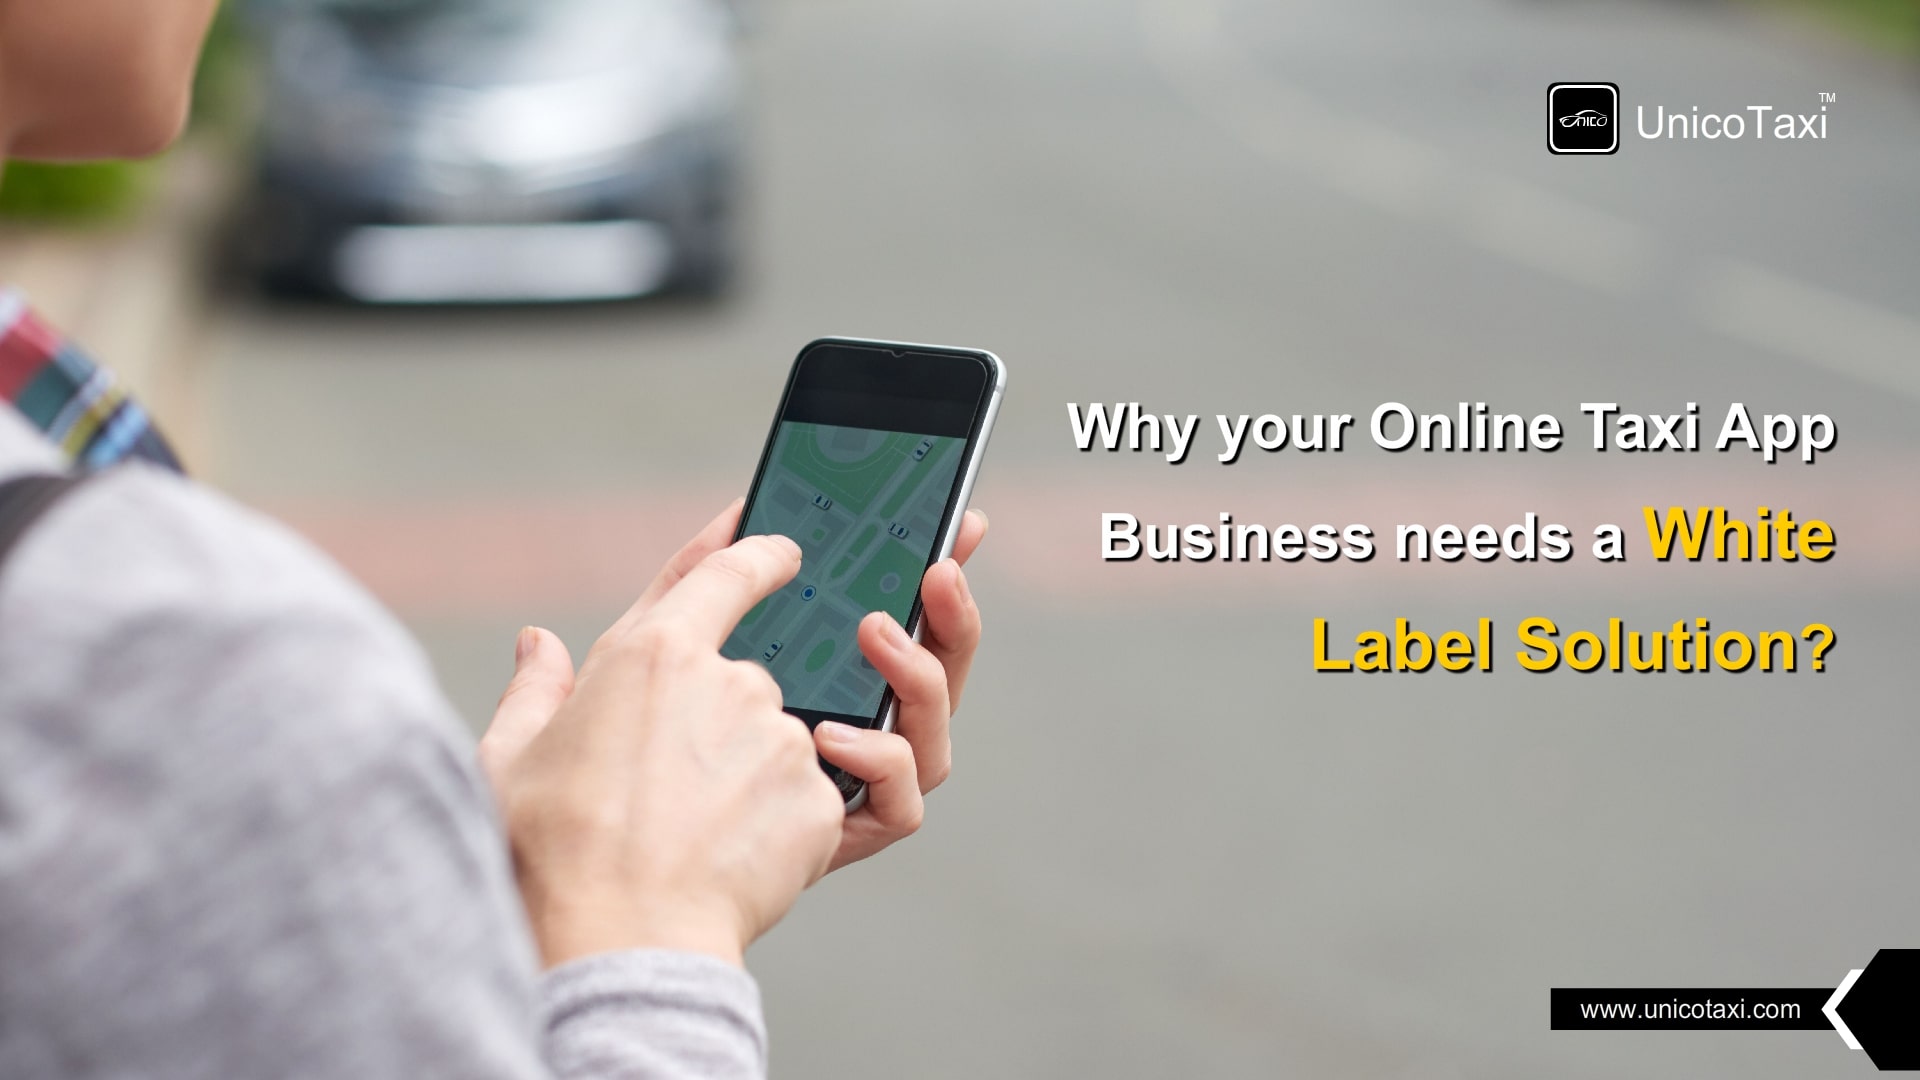 Why Your Online Taxi App Business Needs A White Label Solution?